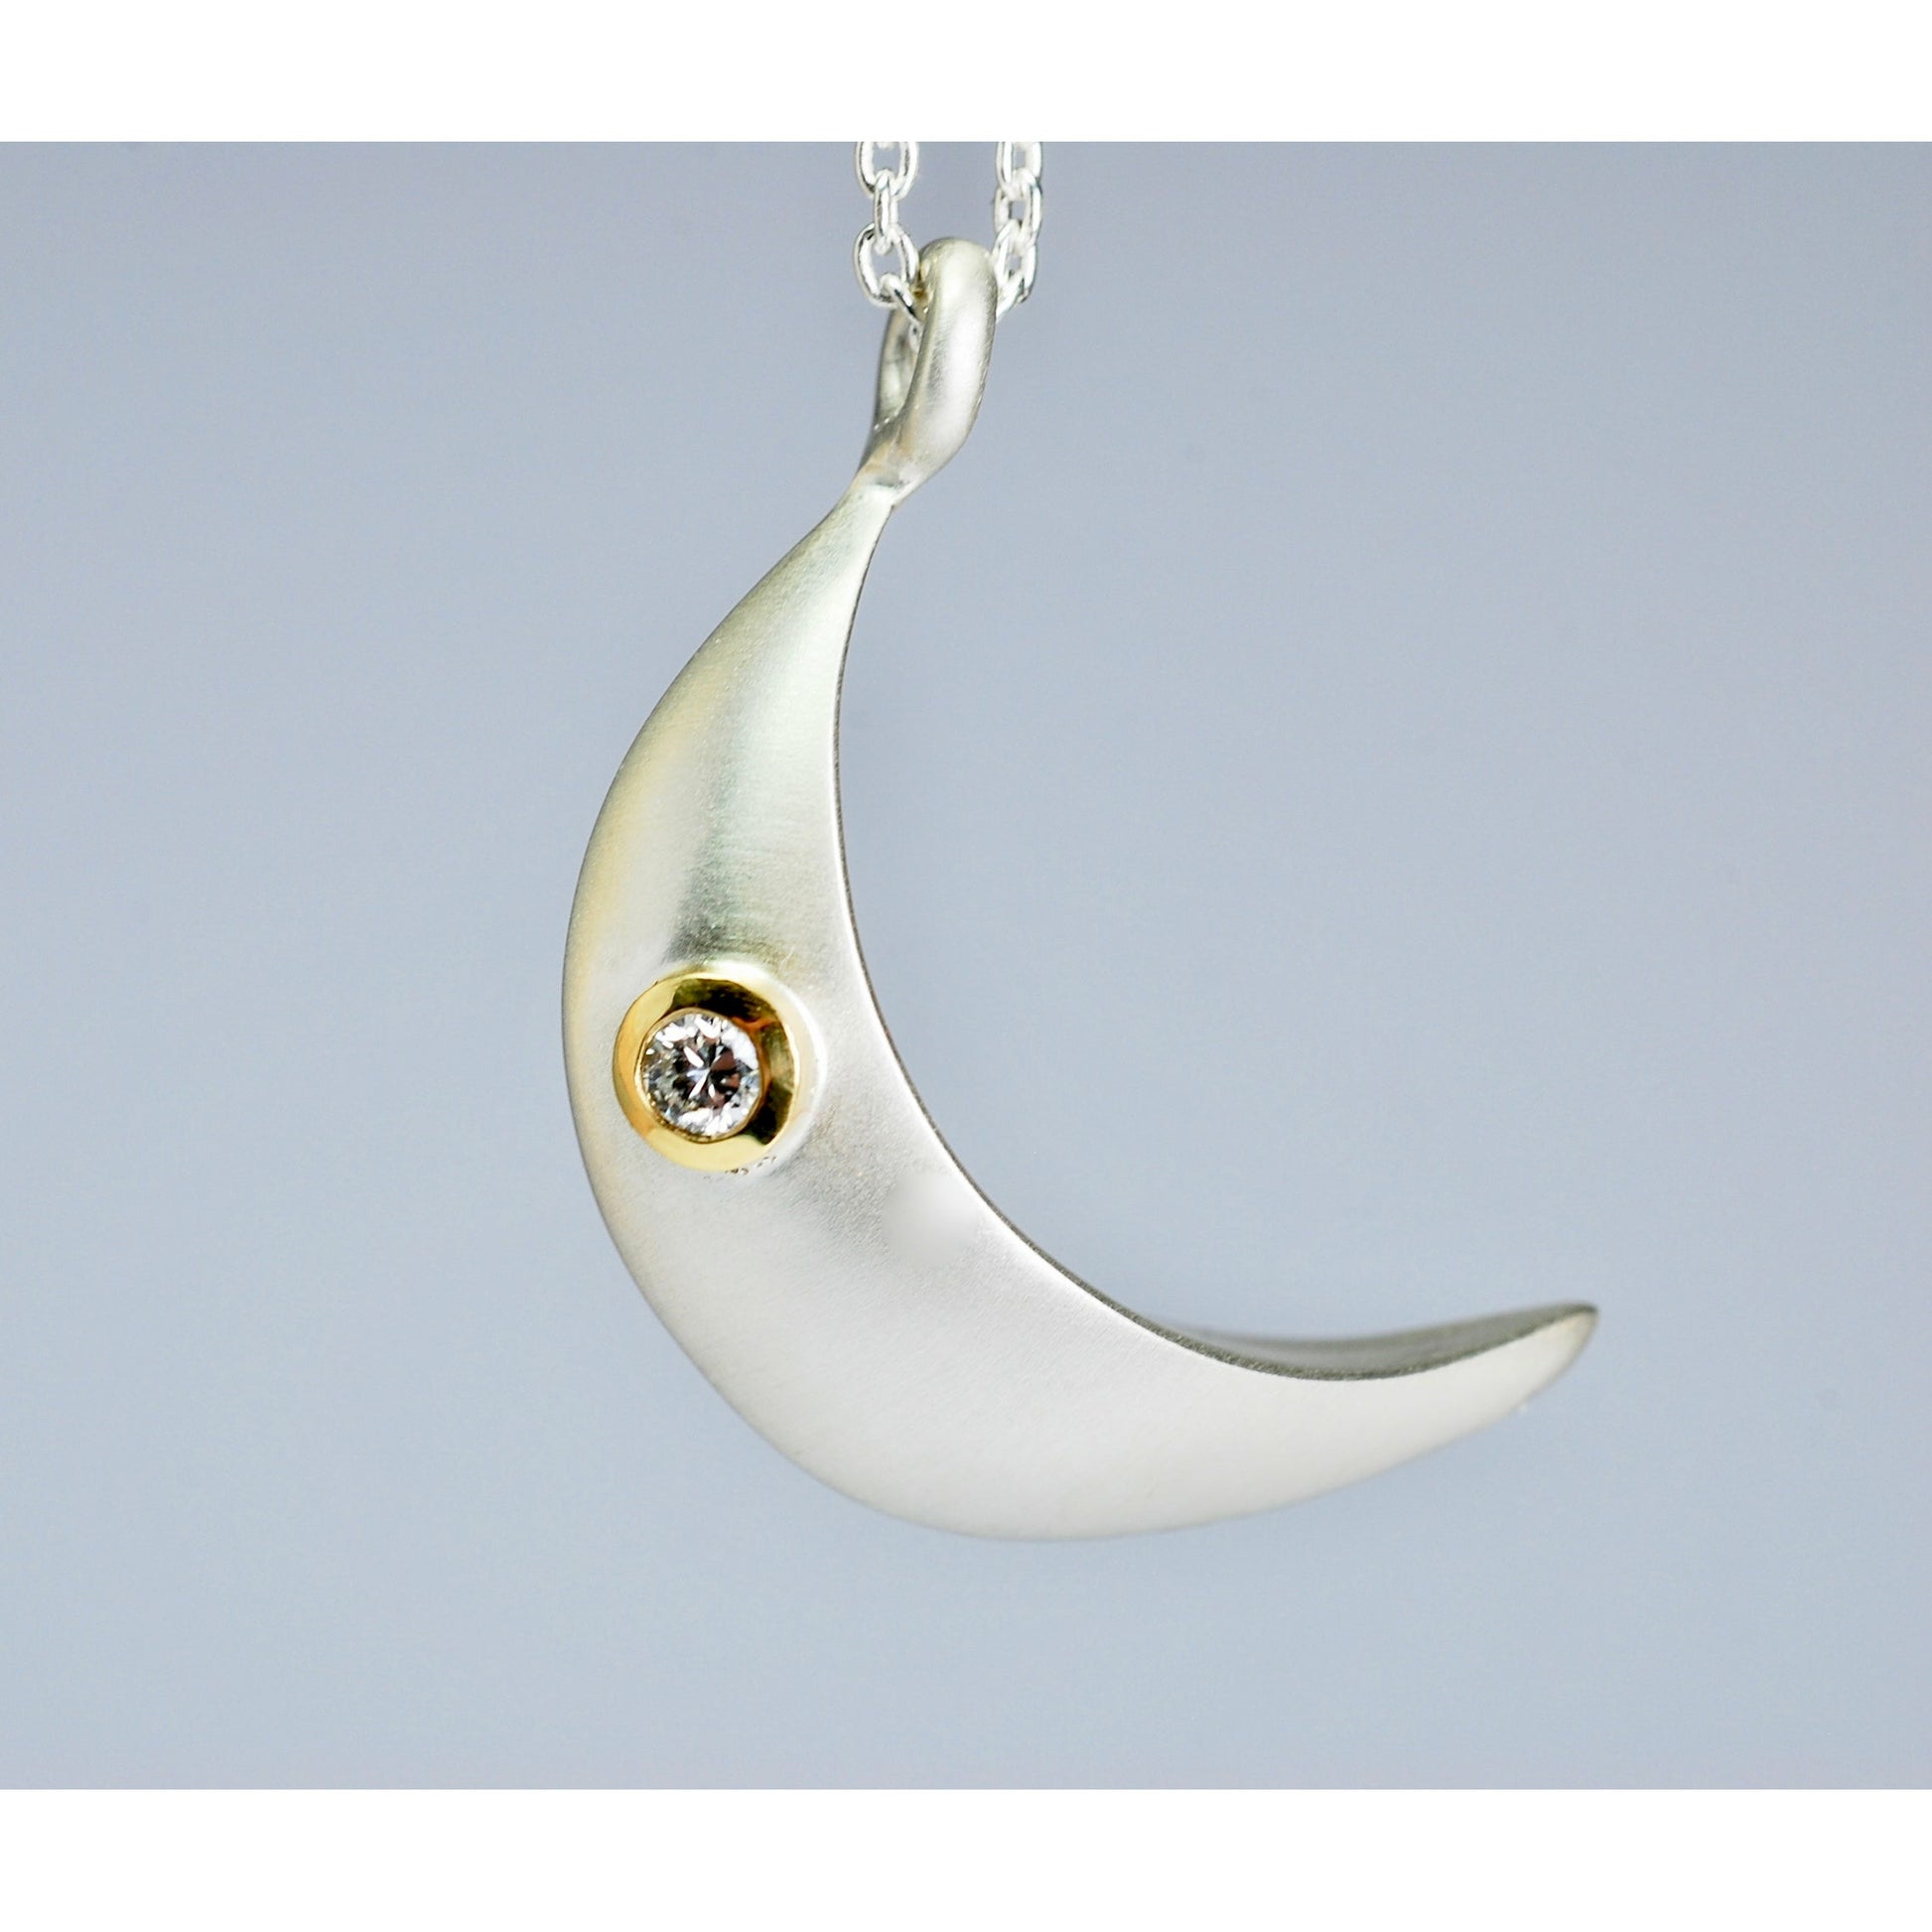 Crescent Moon Necklace / Pendant Details. -1 inch Handmade moon from the top of moon to the bottom. - Stone of your choice. - 24 inch cable chain.